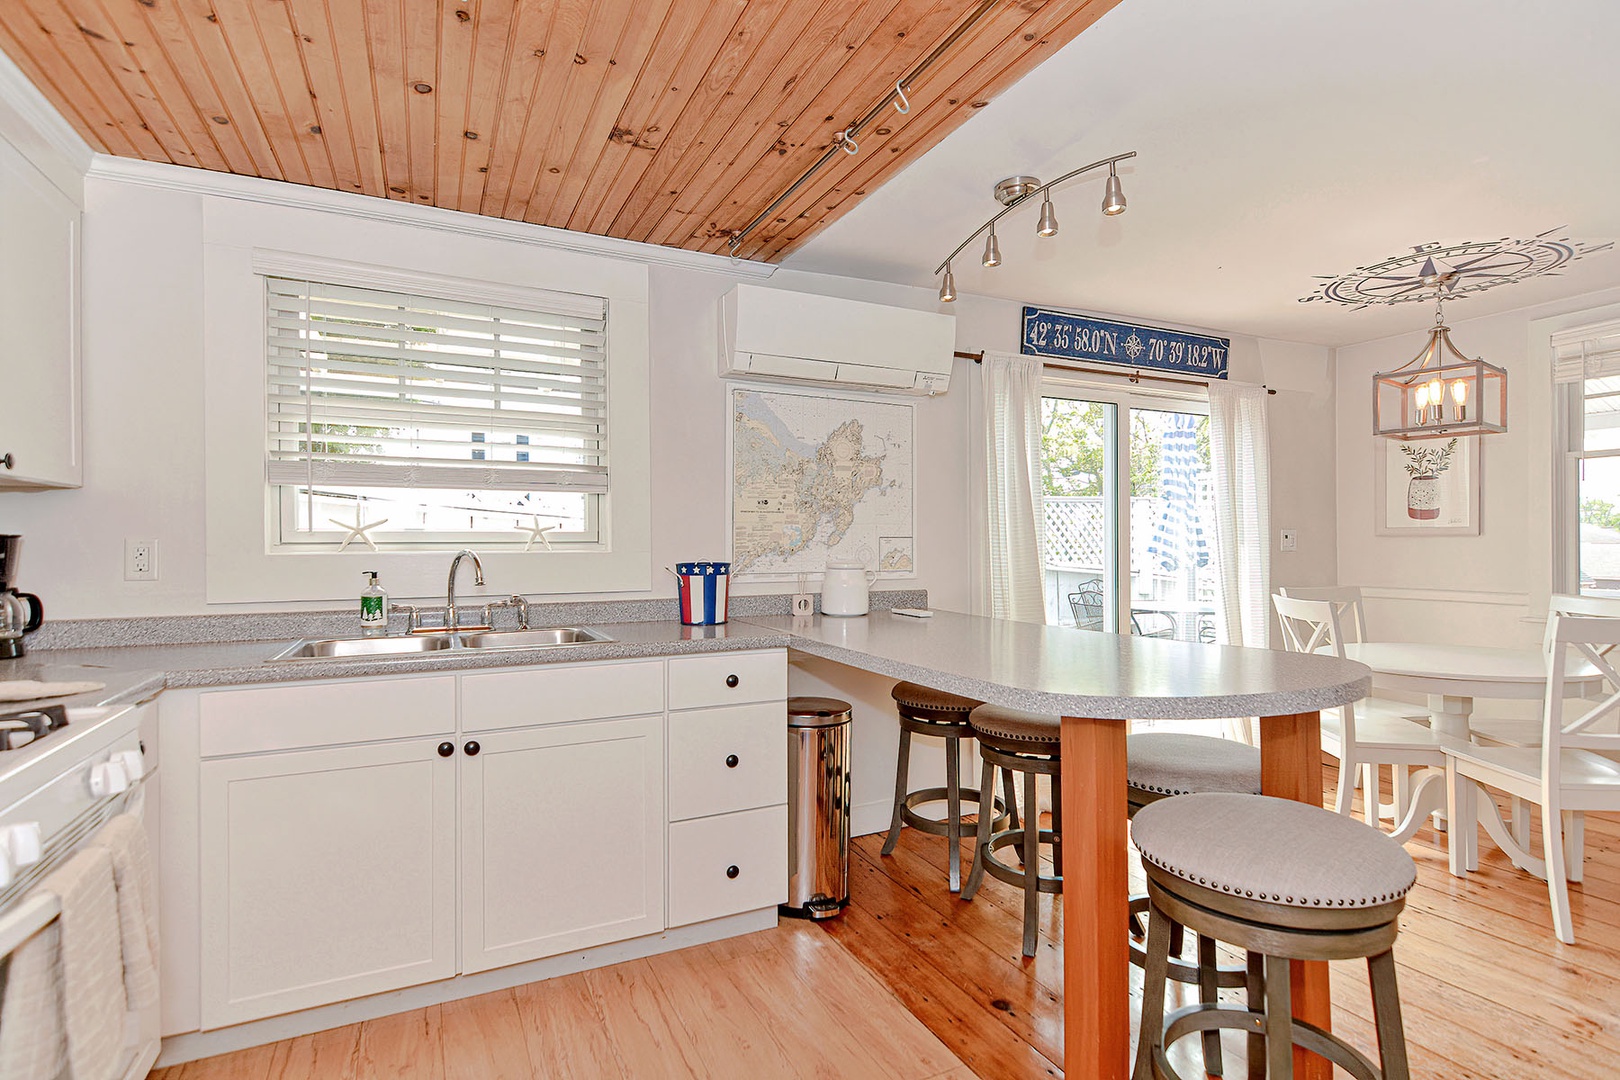 The Kitchen is well-applianced and has a breakfast bar.